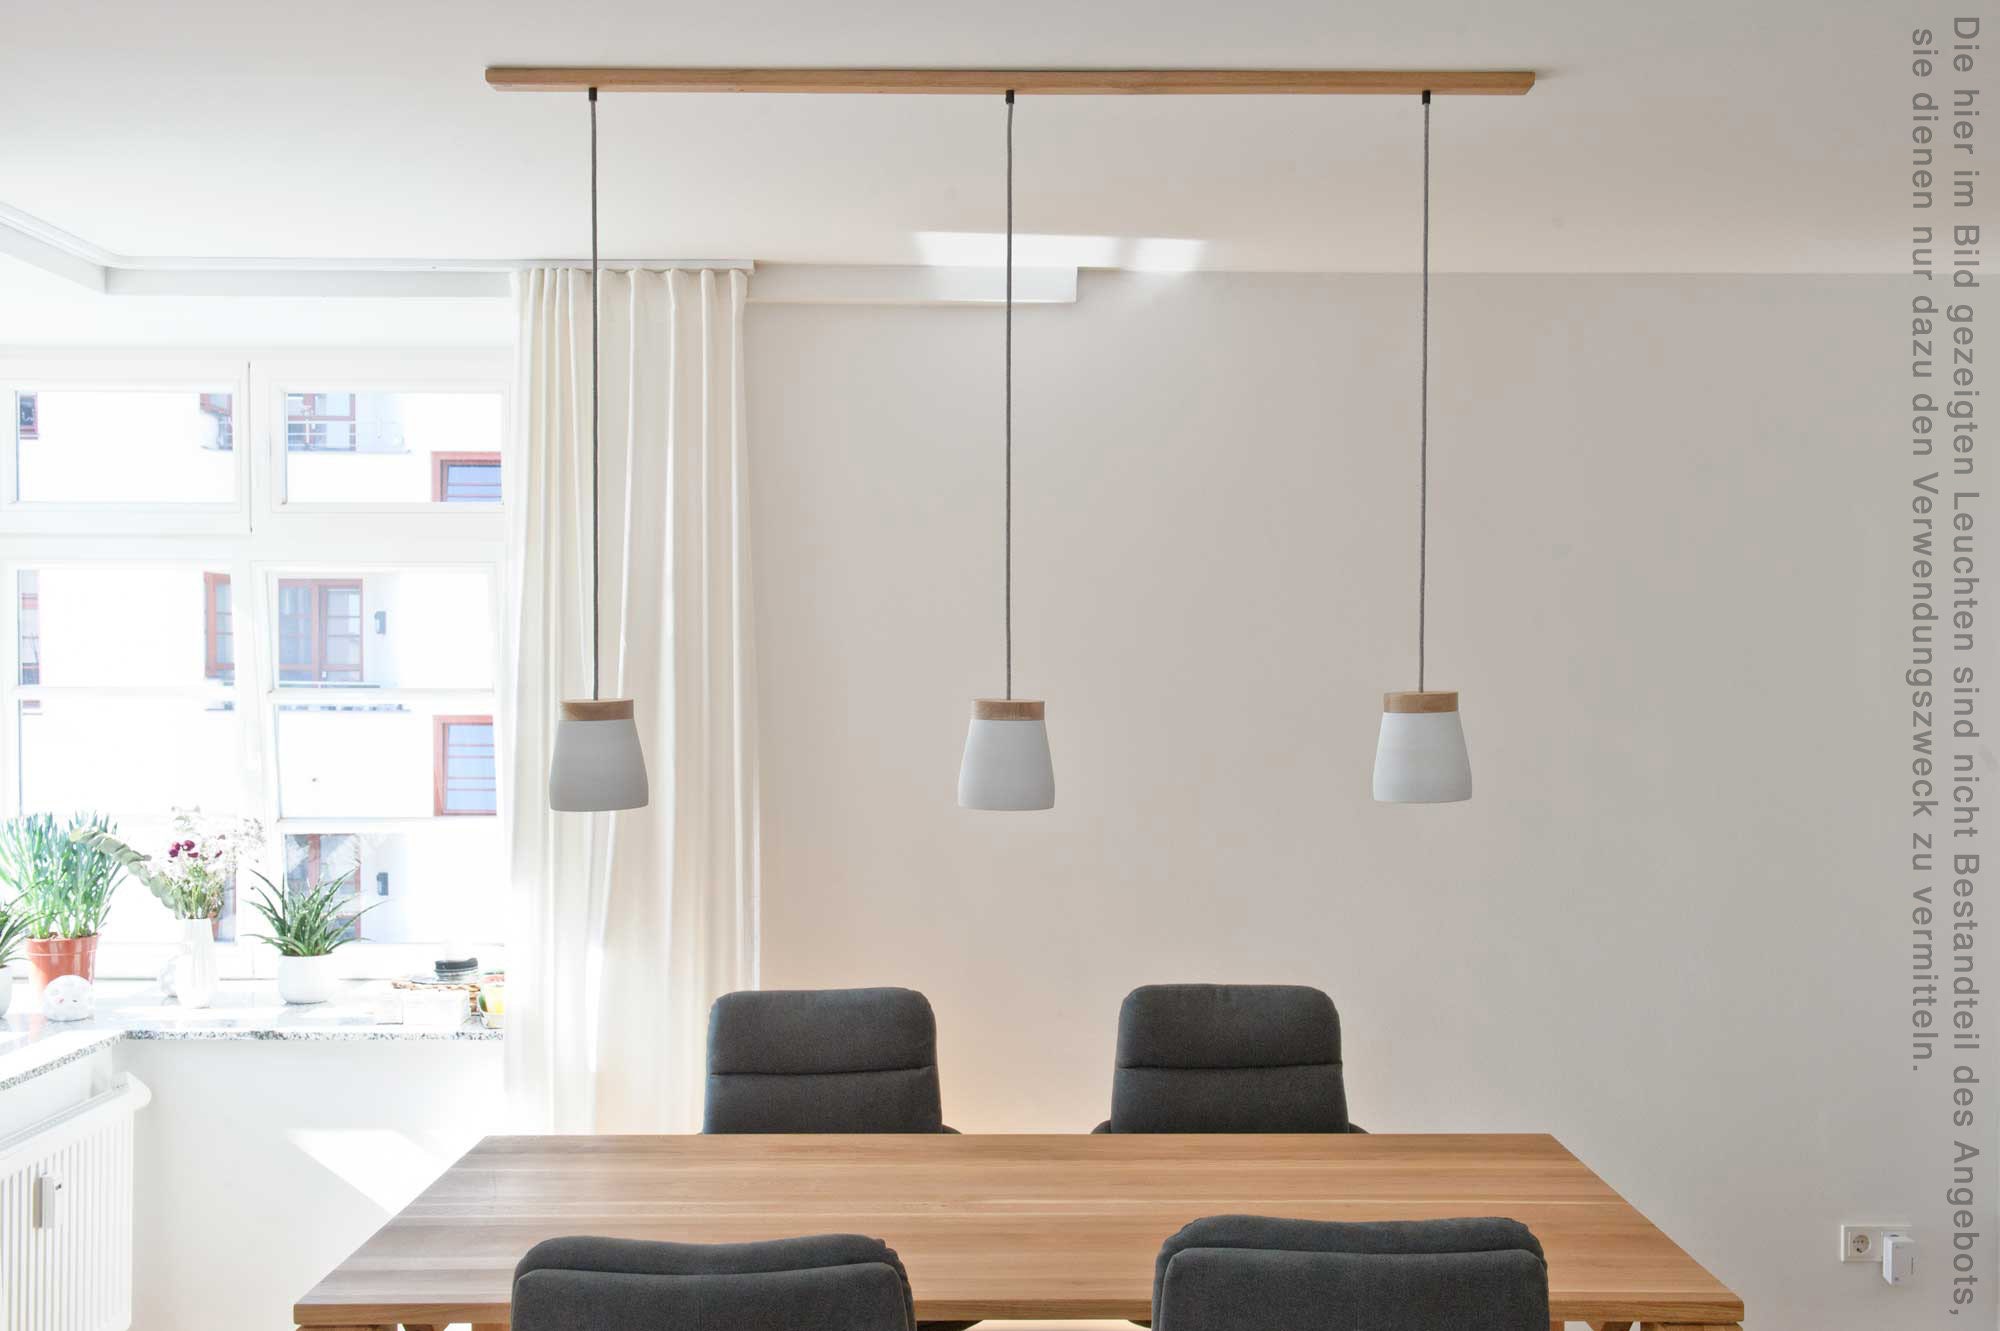 Canopy in Luminaire - Counter Canopy Suspension and Power Wood for Pendant Etsy Distribution Luminaires Oak Dining Pendant Covered Table